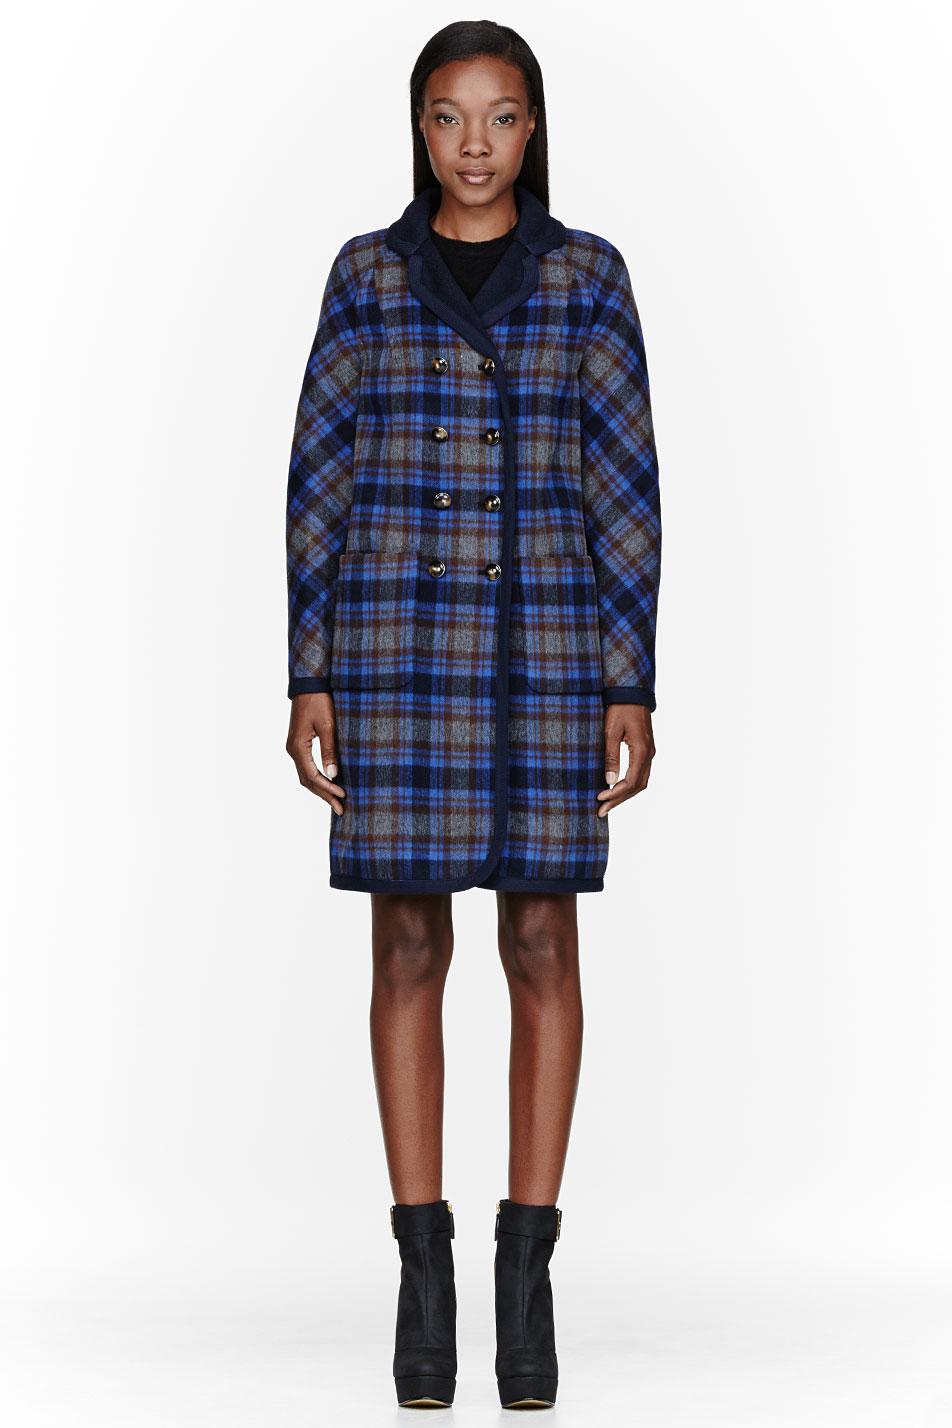 Marc By Marc Jacobs Navy Plaid Wool Reversible Gable Coat | LookMazing